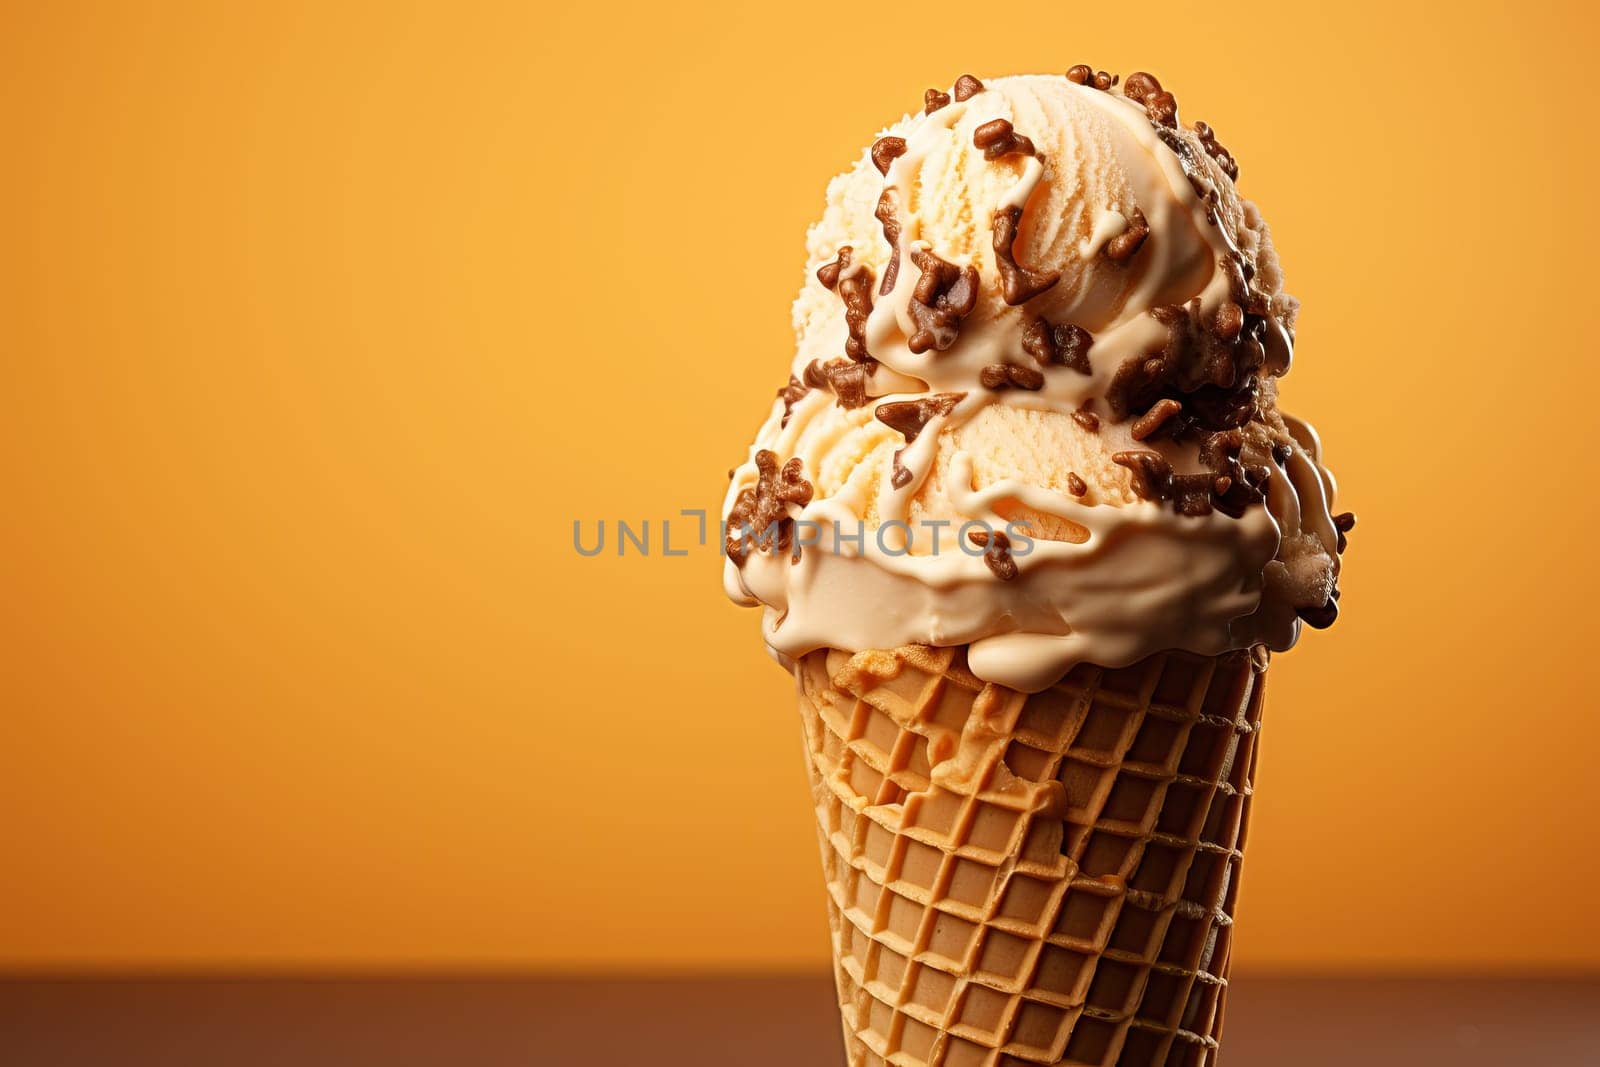 A cone of chocolate ice cream on a yellow background sprinkled with chocolate close-up.